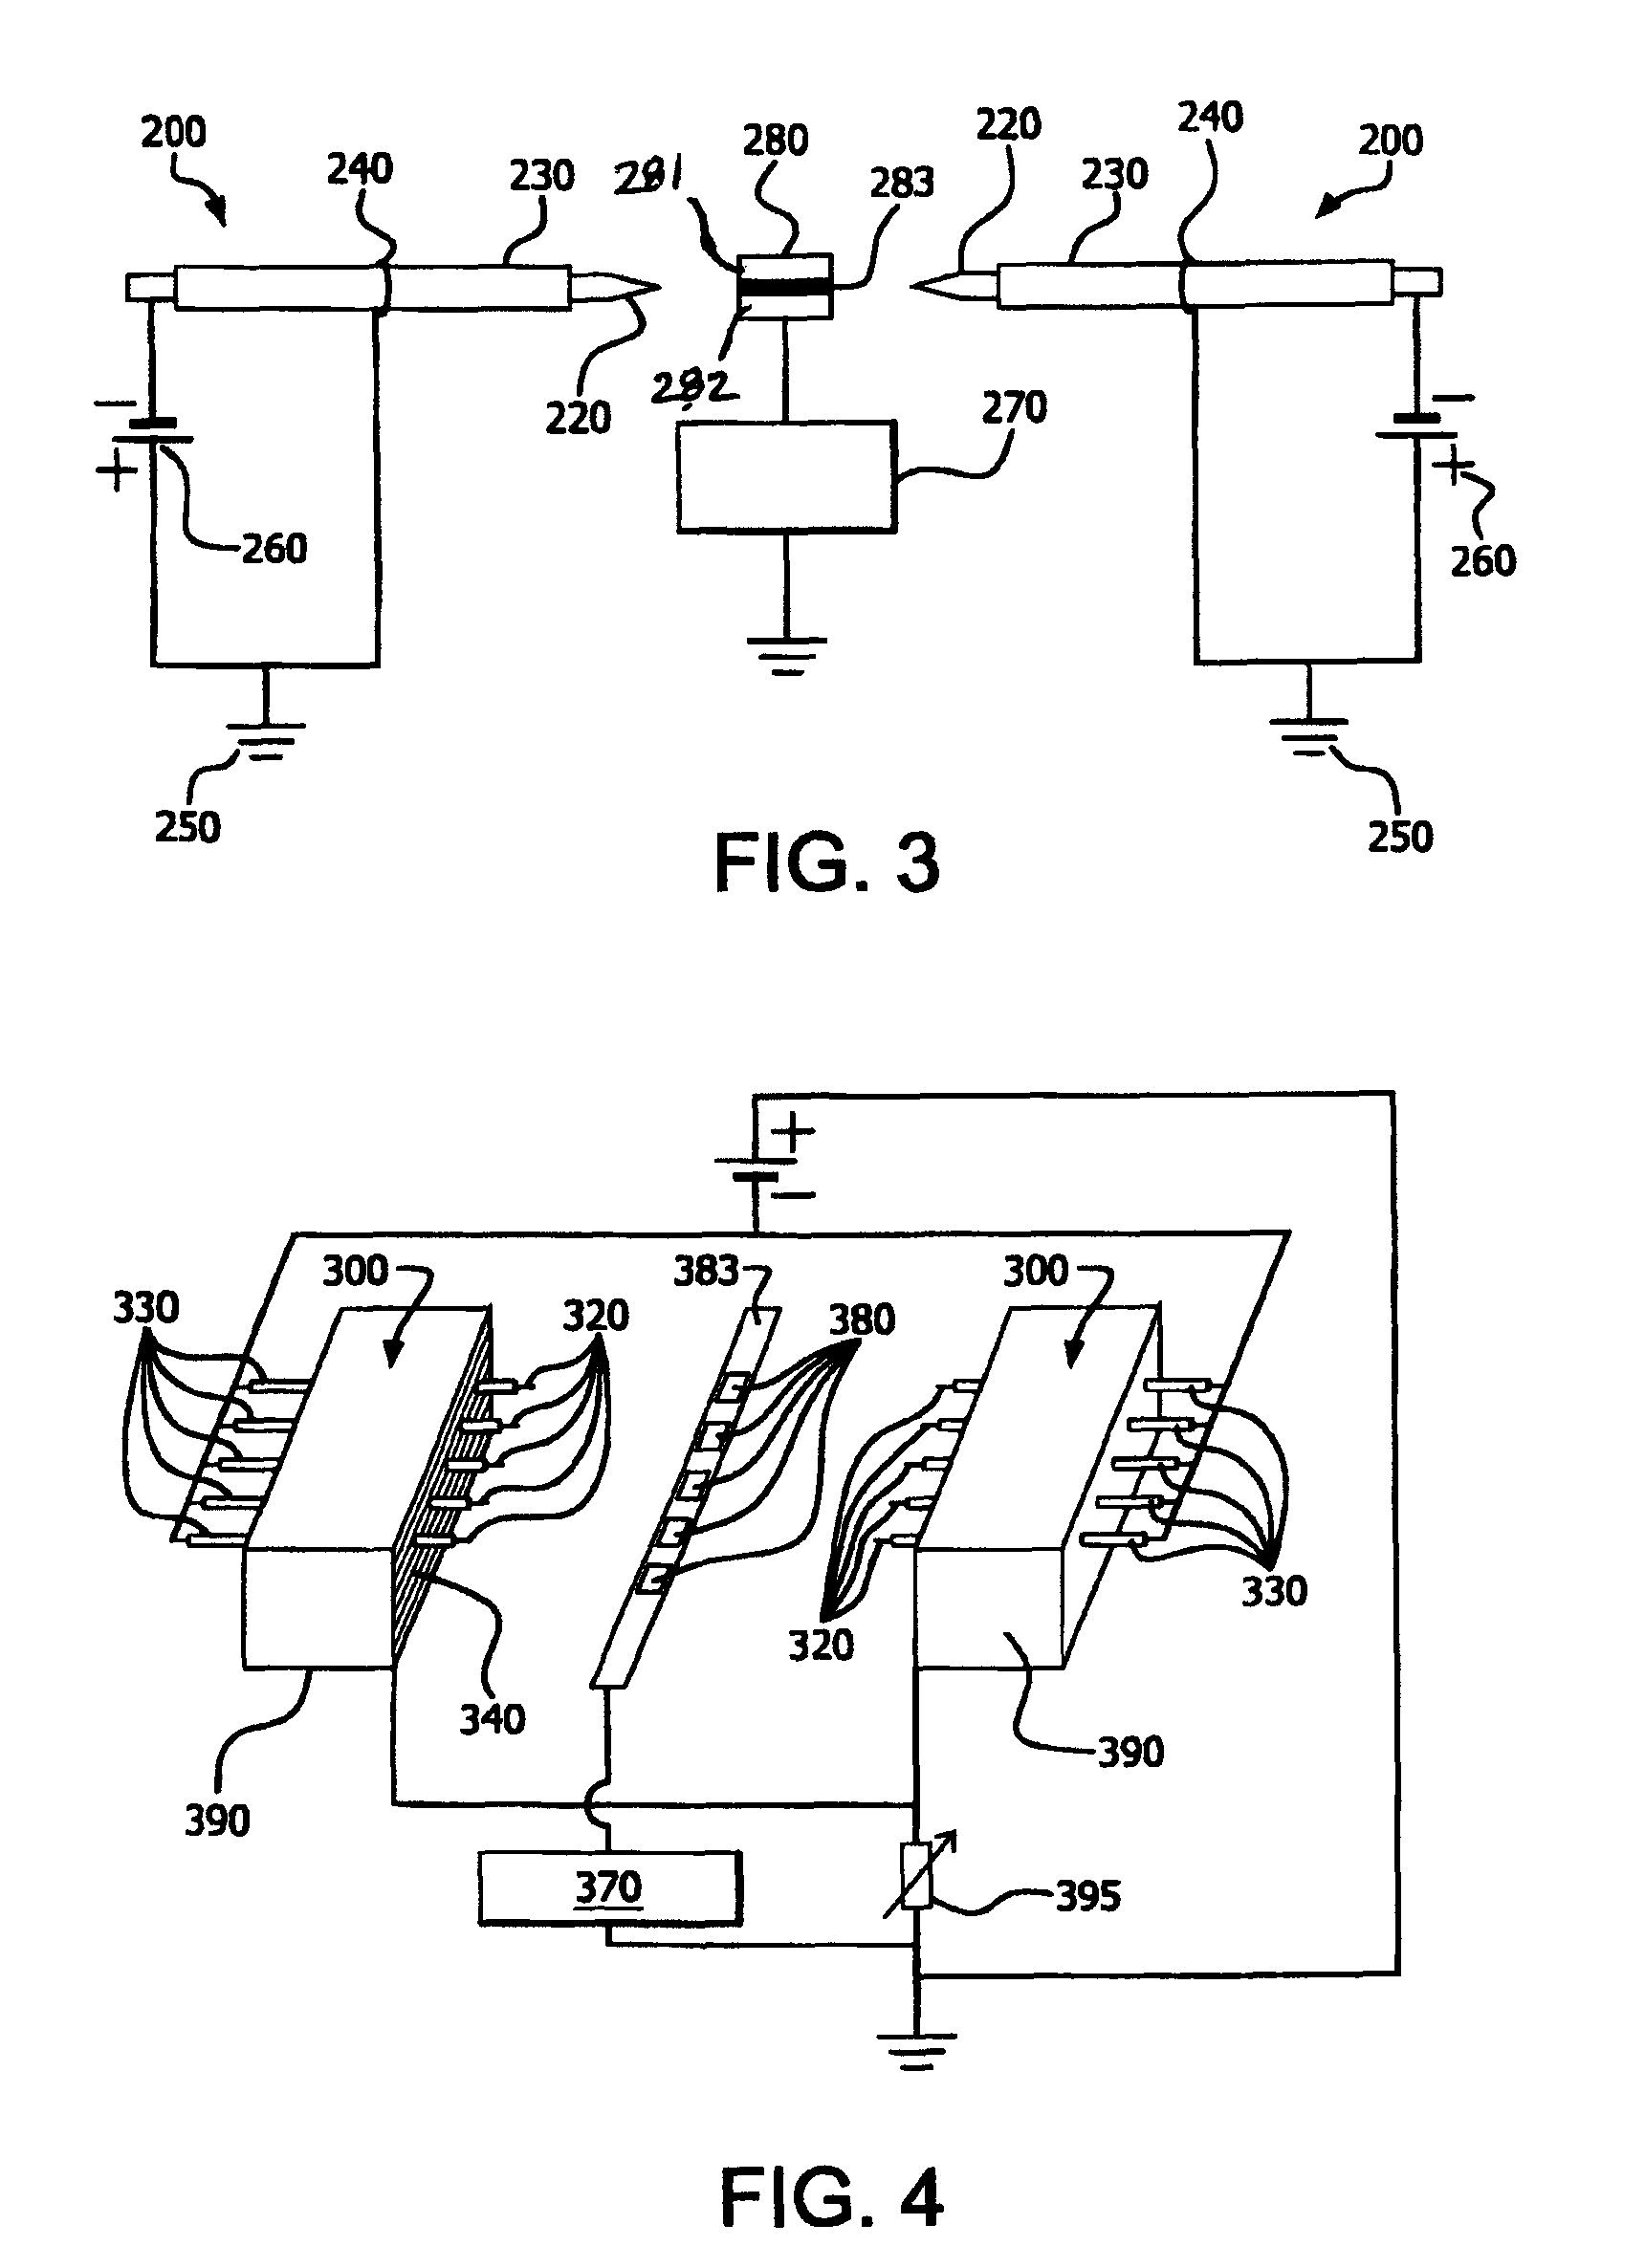 Apparatus and method for removal of surface oxides via fluxless technique involving electron attachment